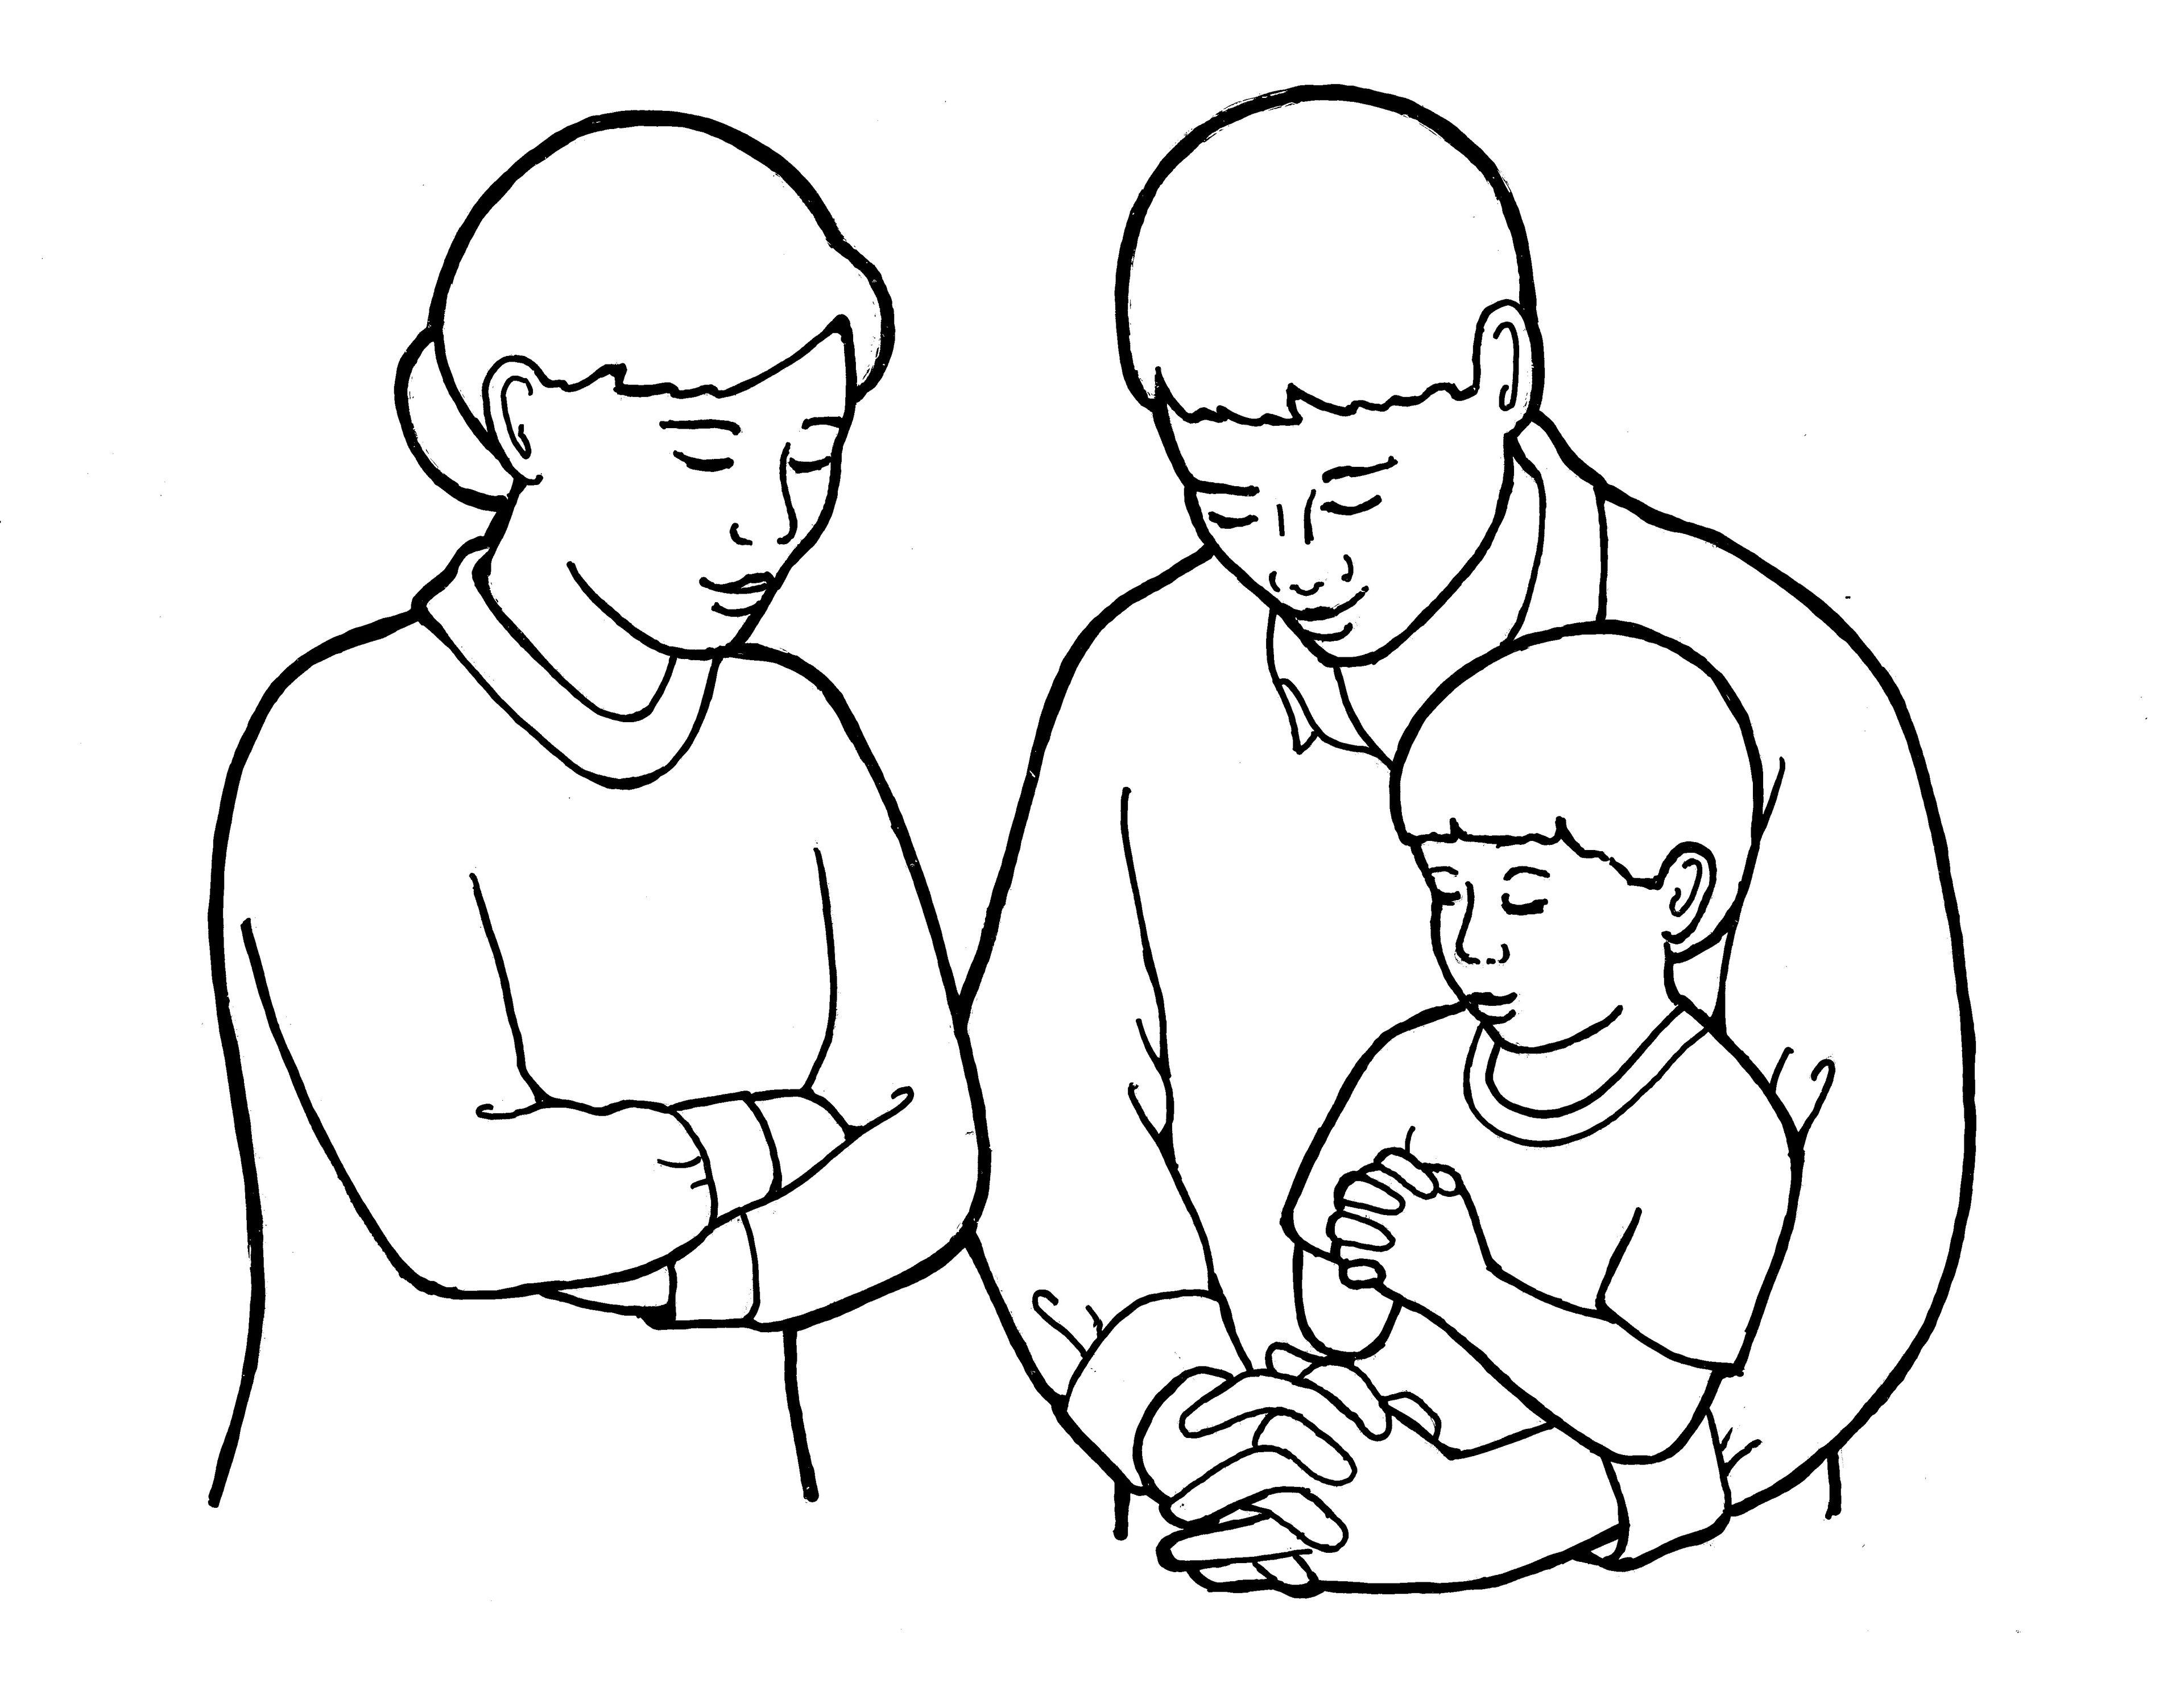 An illustration of parents praying with a young child, from the nursery manual Behold Your Little Ones (2008), page 55.